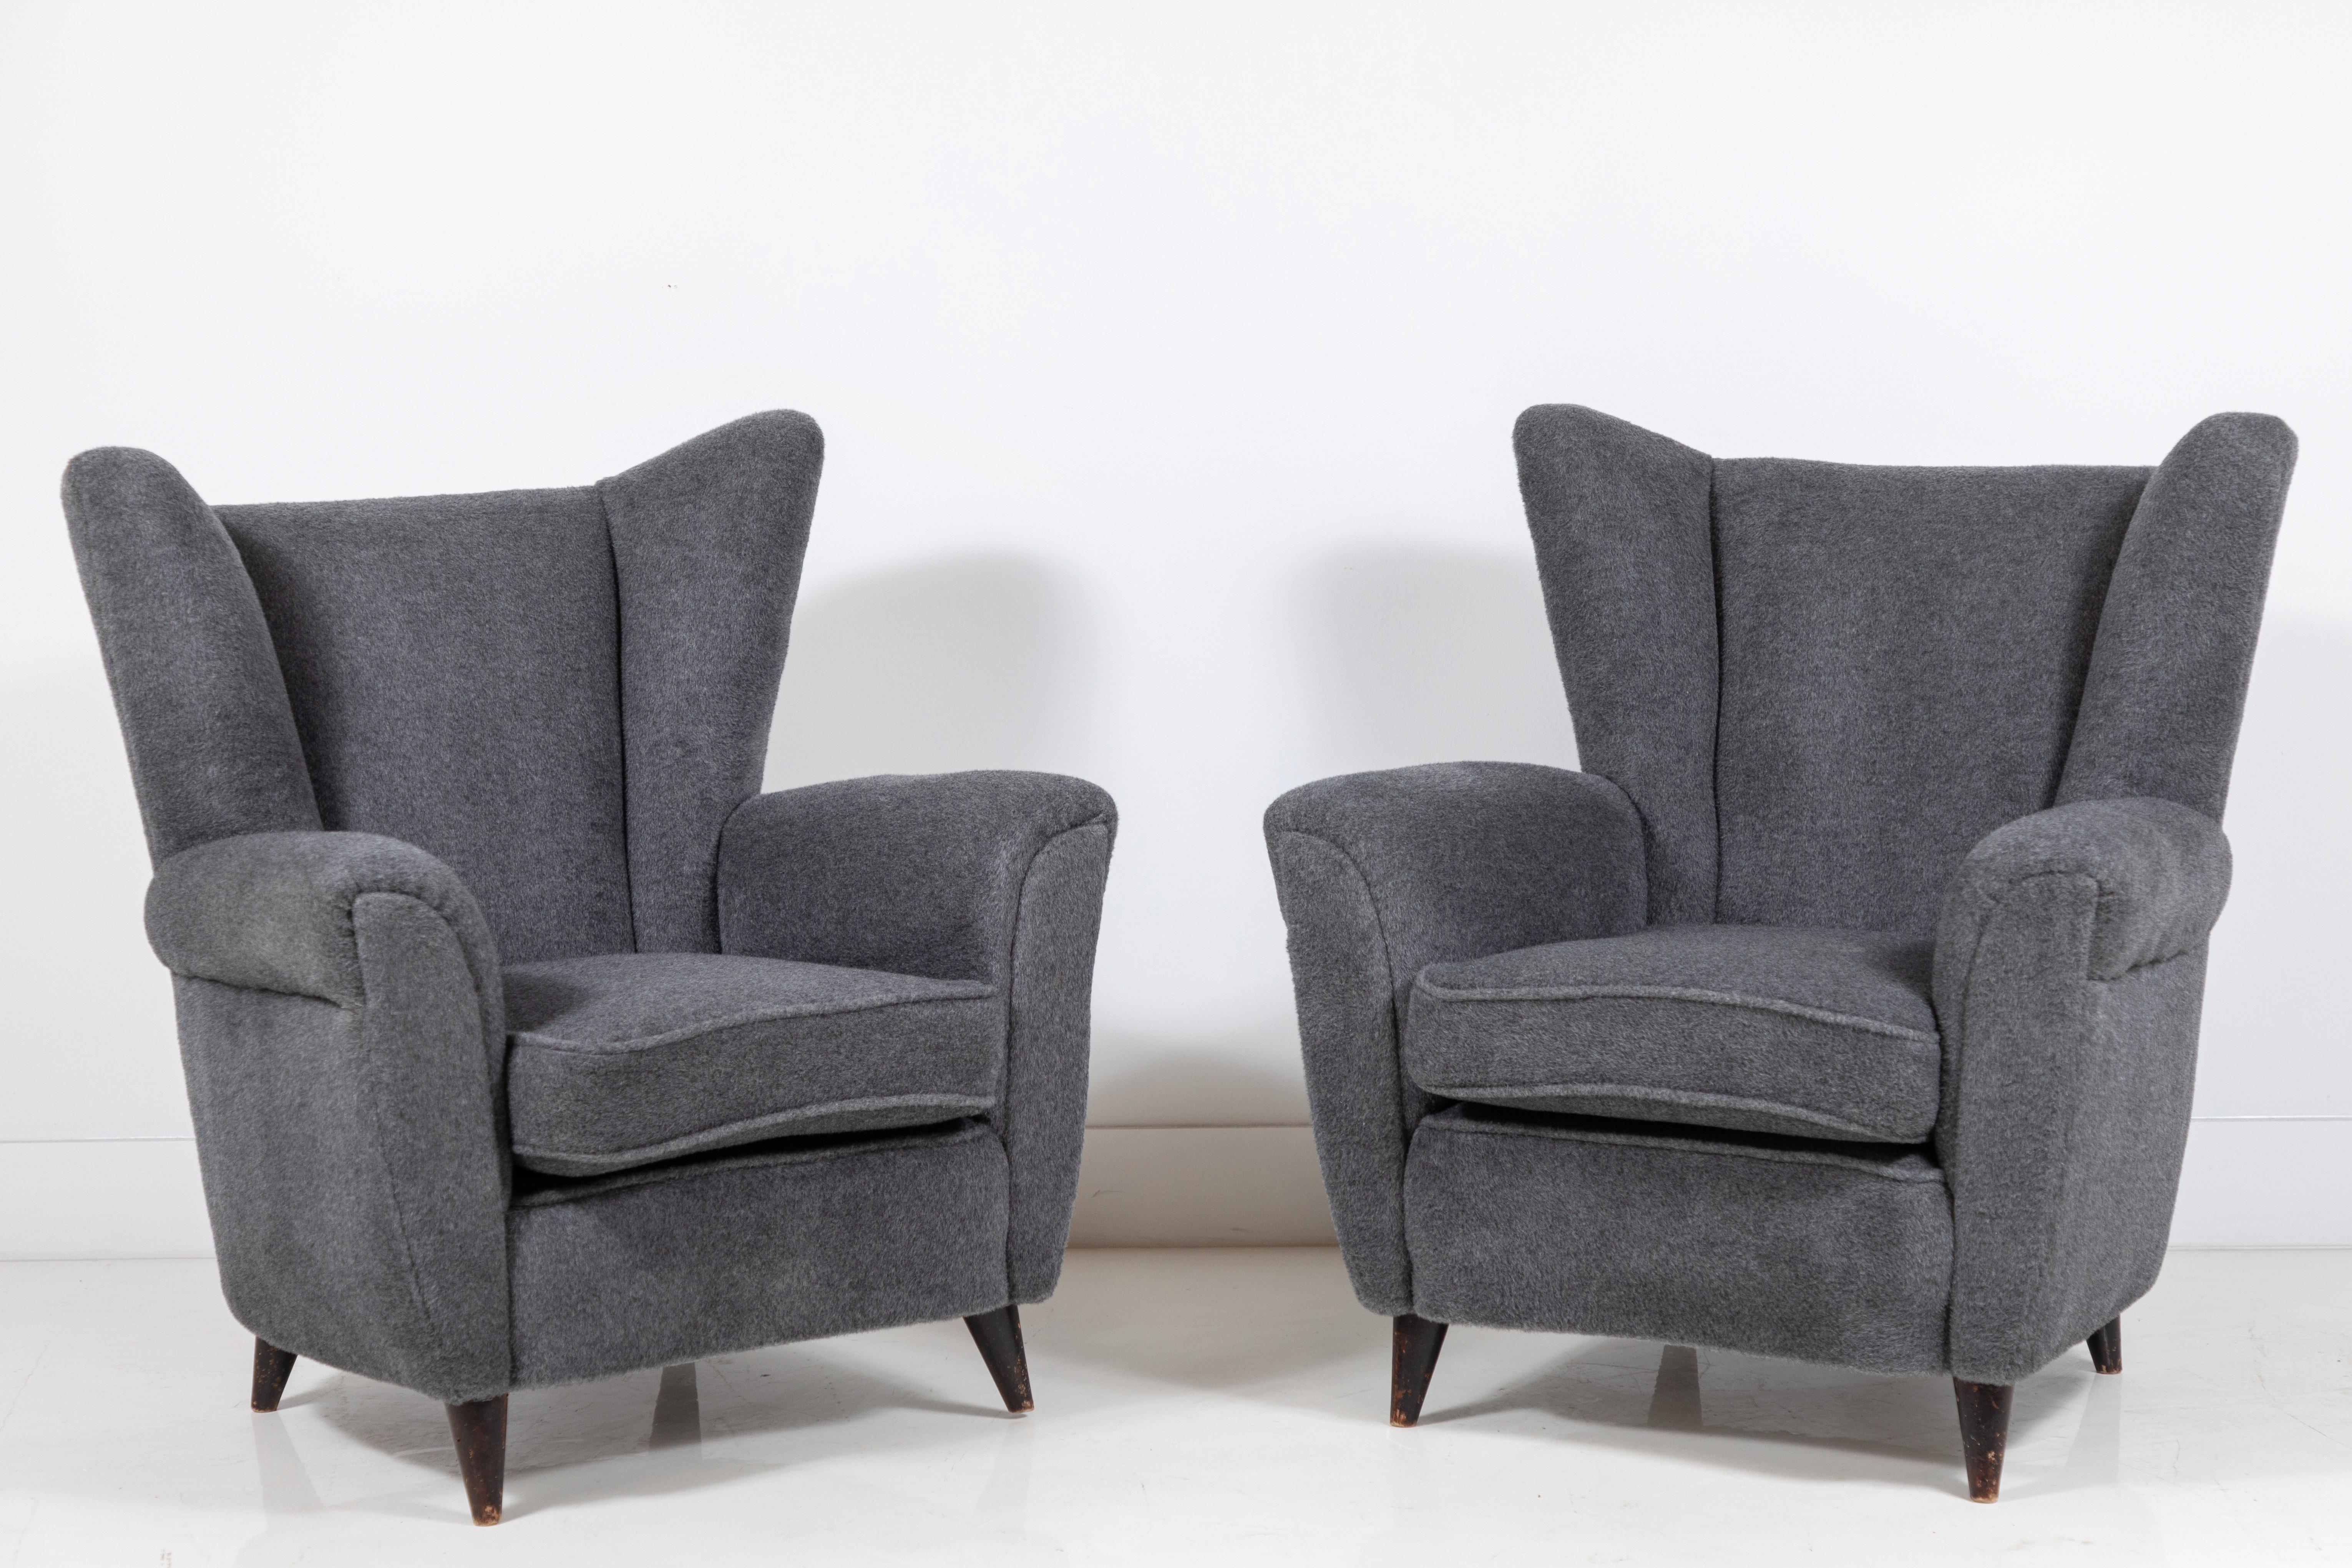 Pair of French midcentury wingback chairs upholstered in a grey mohair. Original fabric and original finish on the legs.